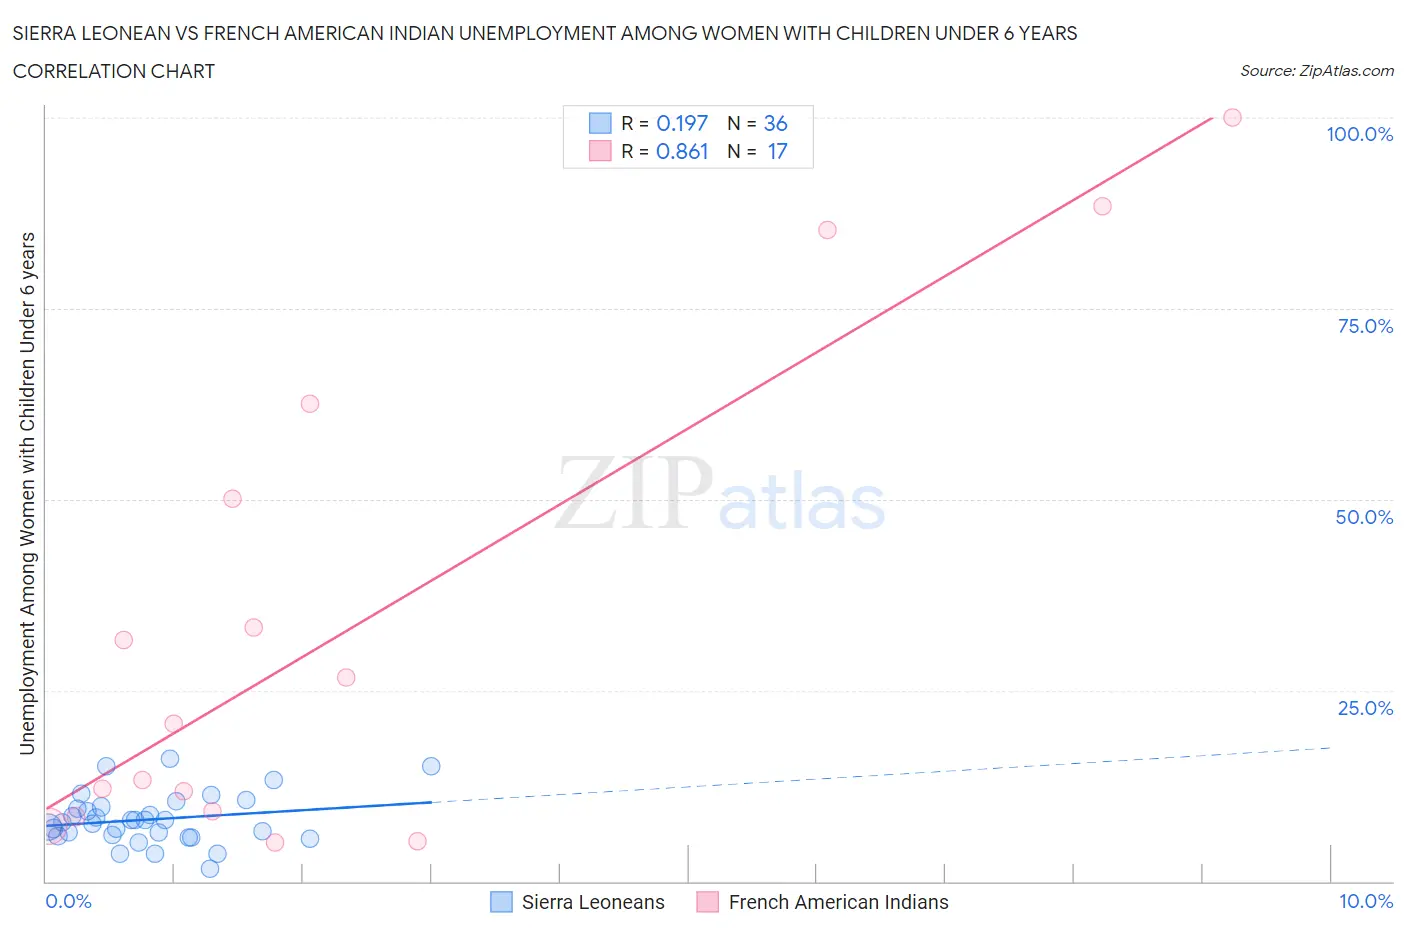 Sierra Leonean vs French American Indian Unemployment Among Women with Children Under 6 years